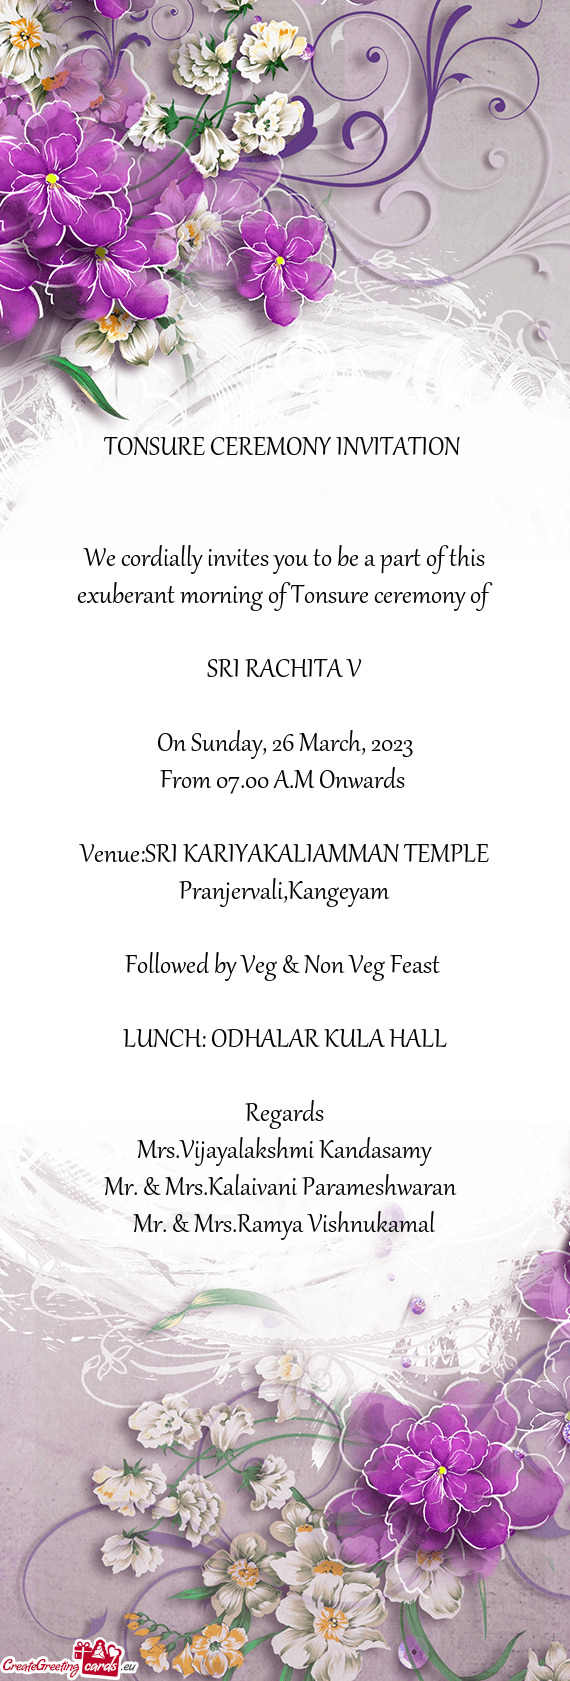 We cordially invites you to be a part of this exuberant morning of Tonsure ceremony of